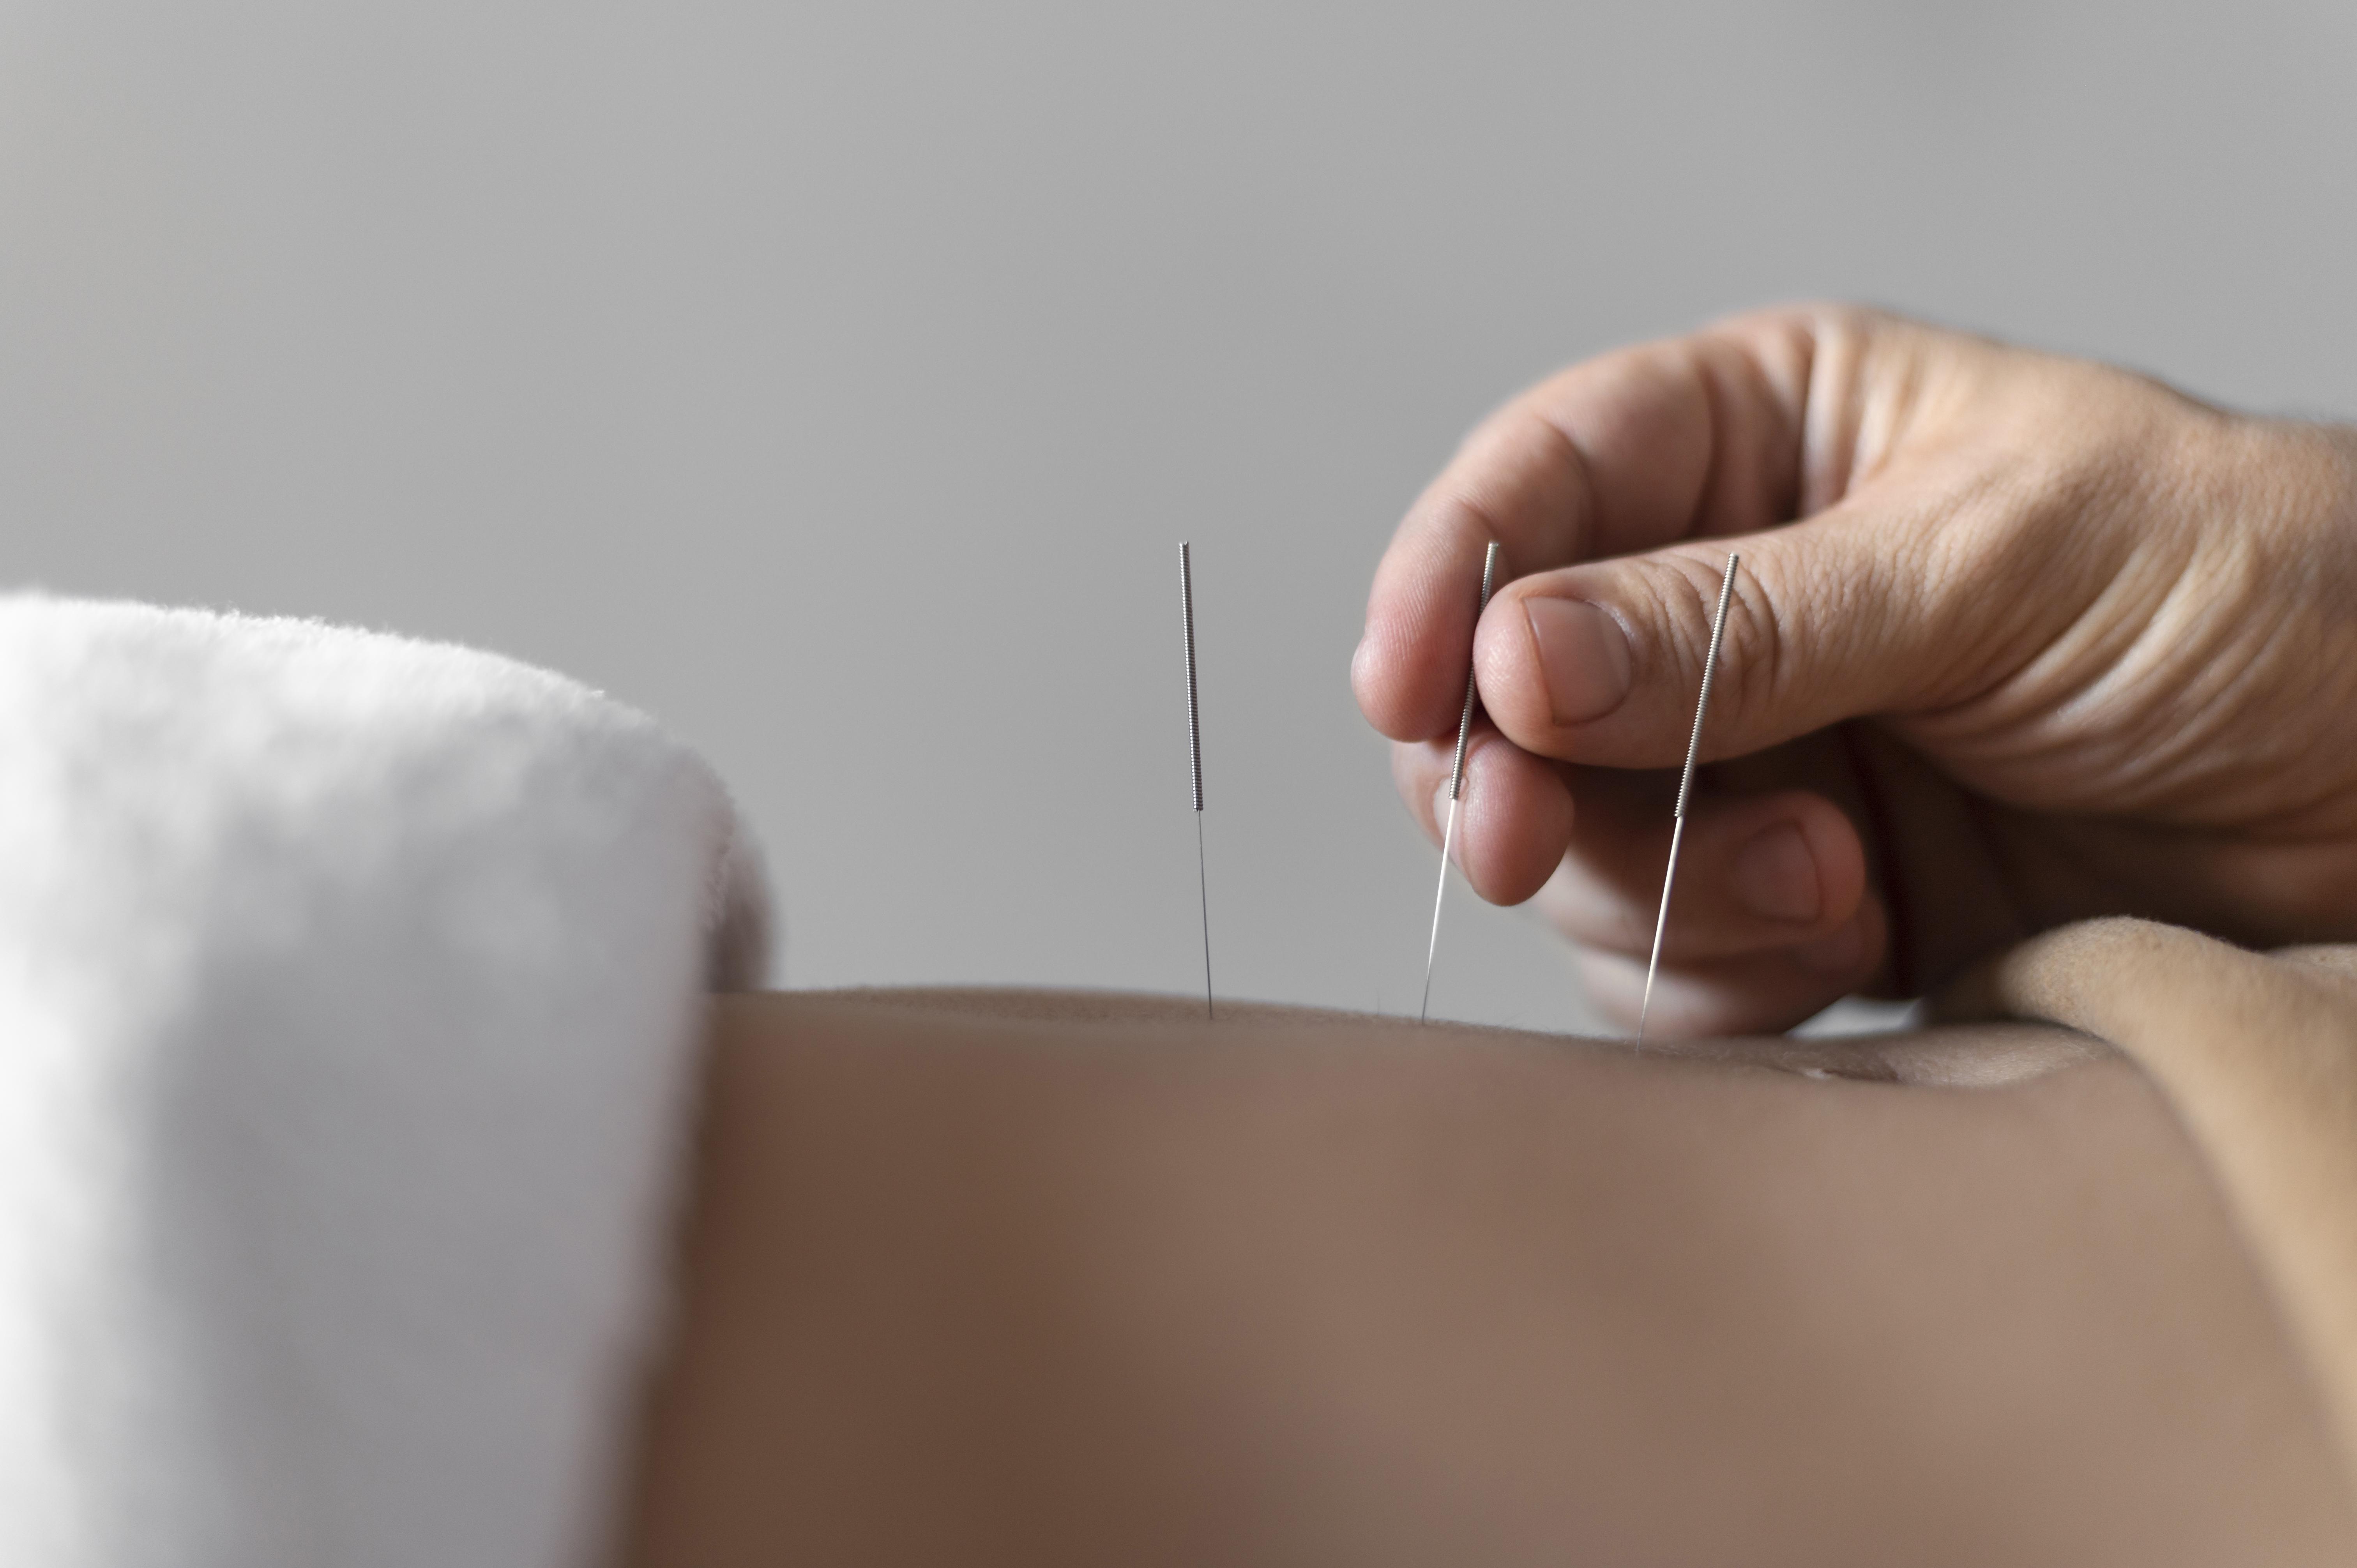 close up of hand holding acupuncture needles